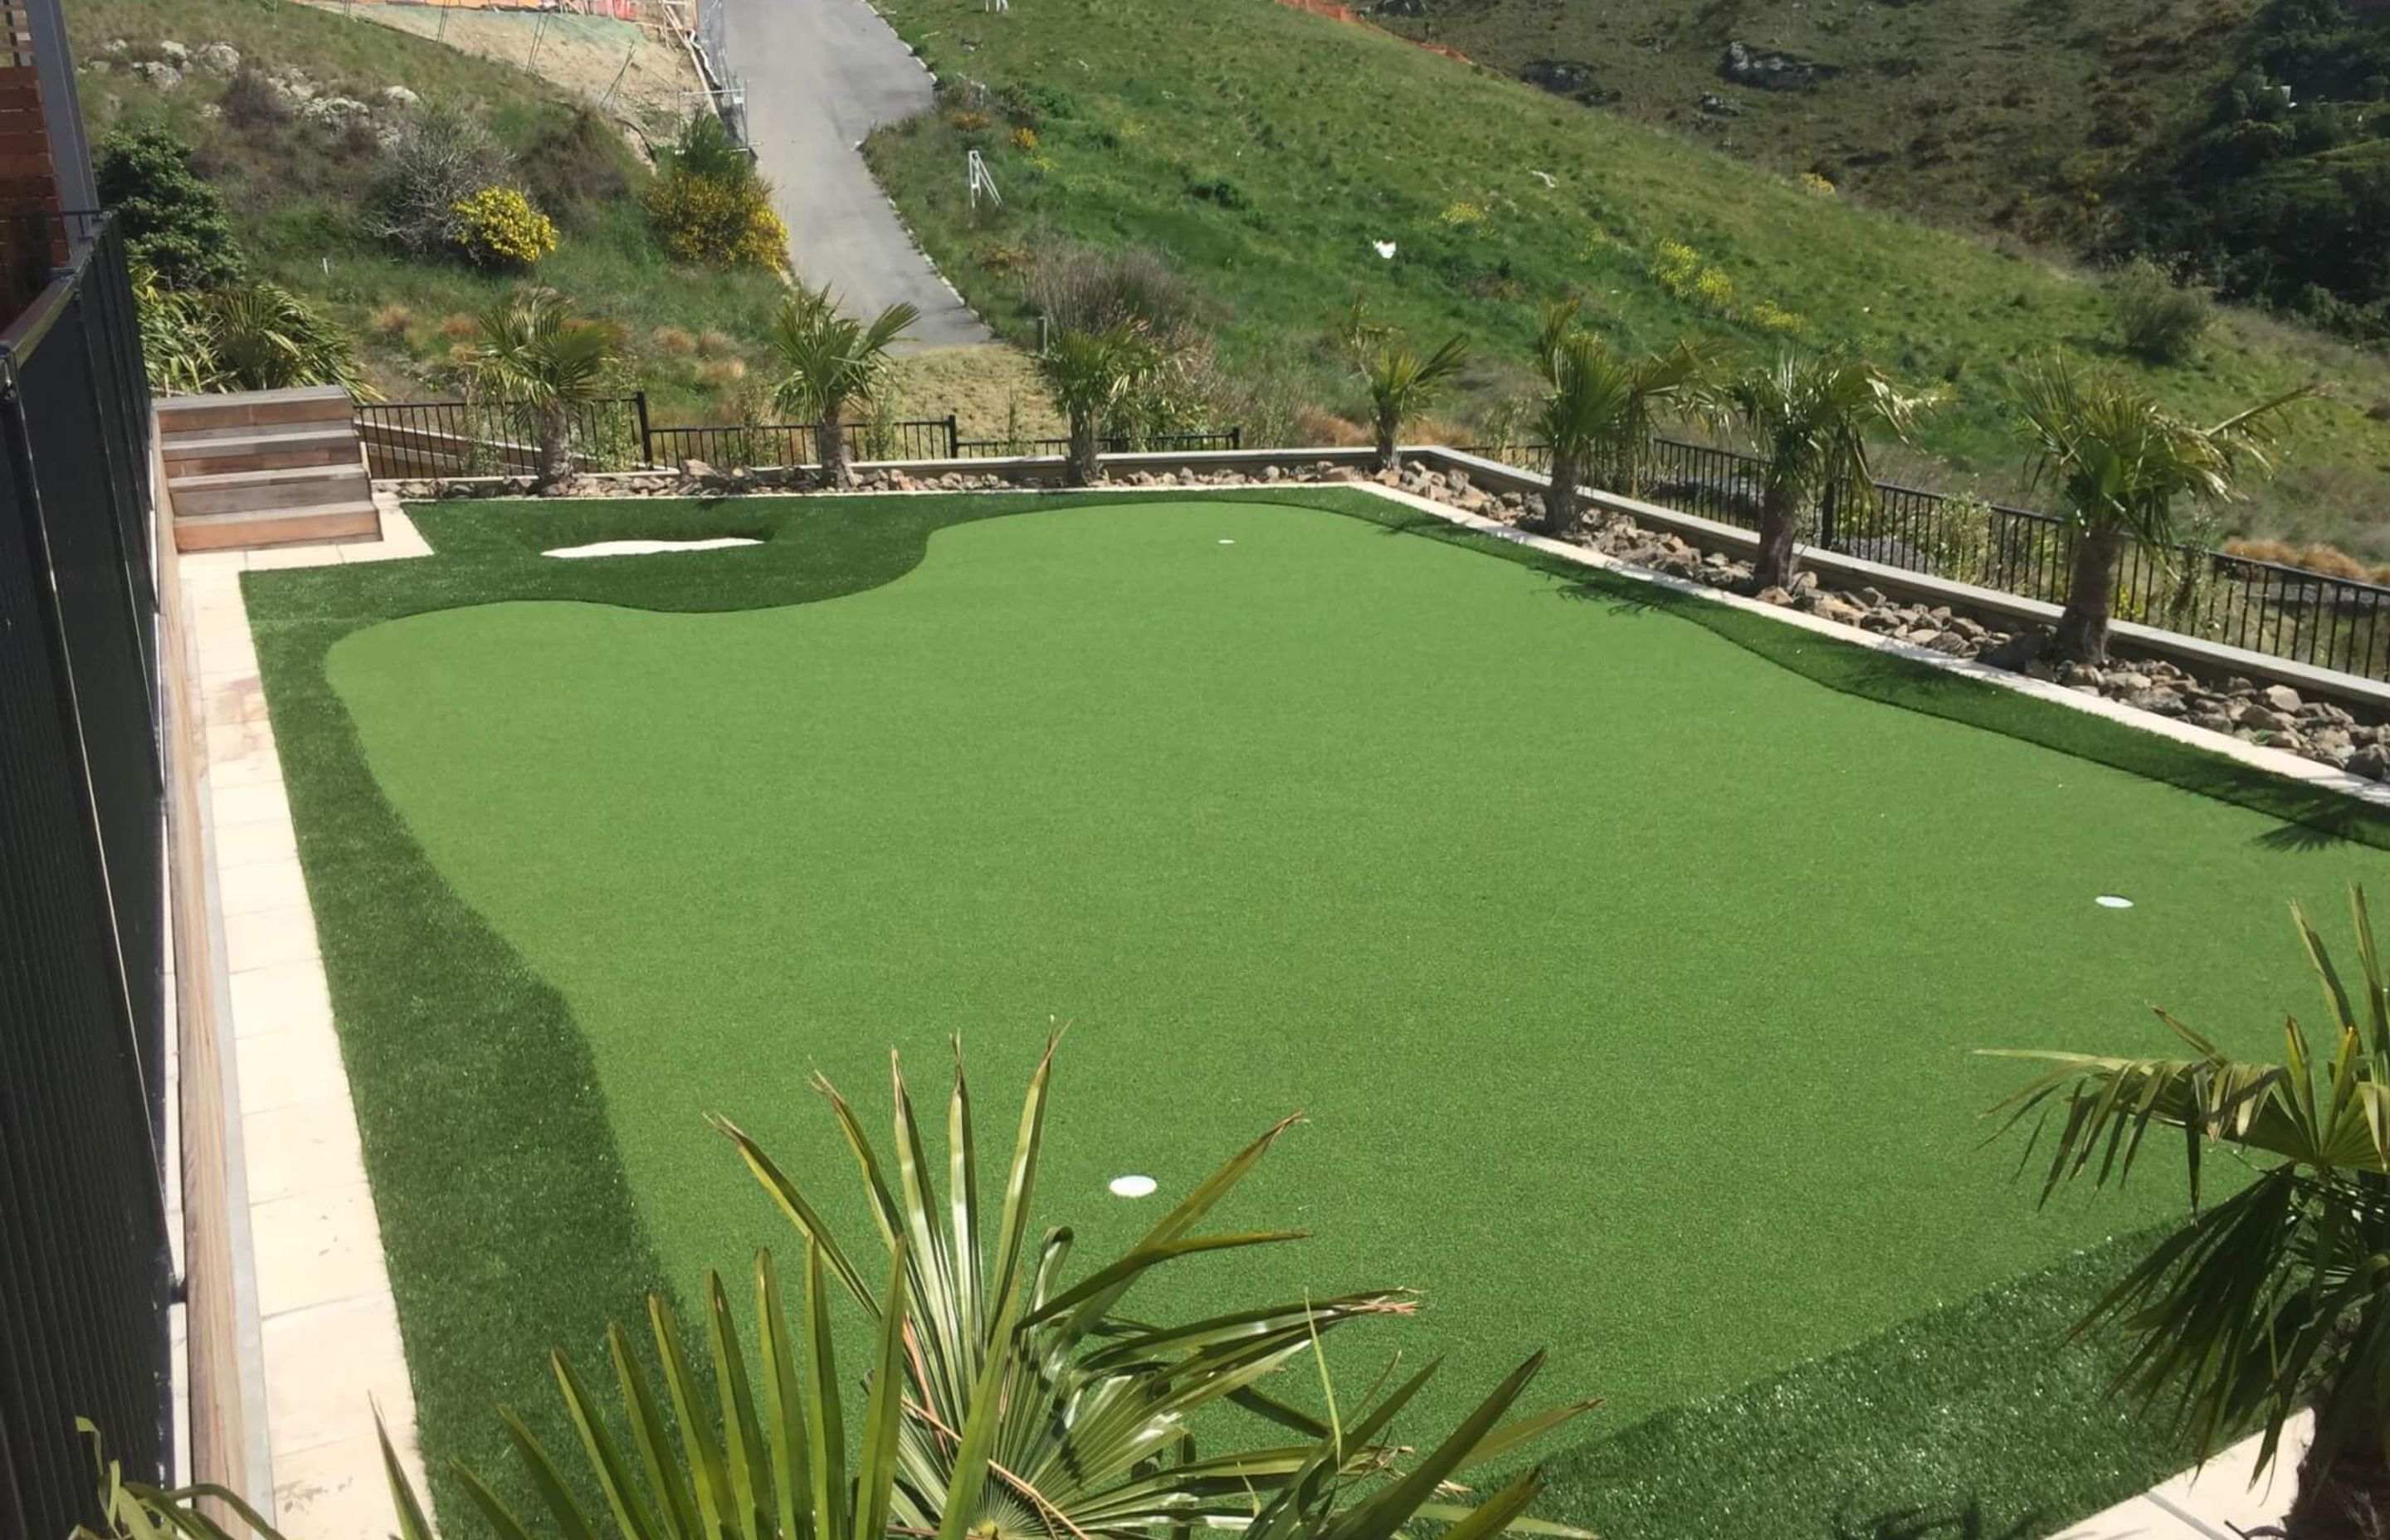 Bring Golf Home with a TigerTurf Putting Green